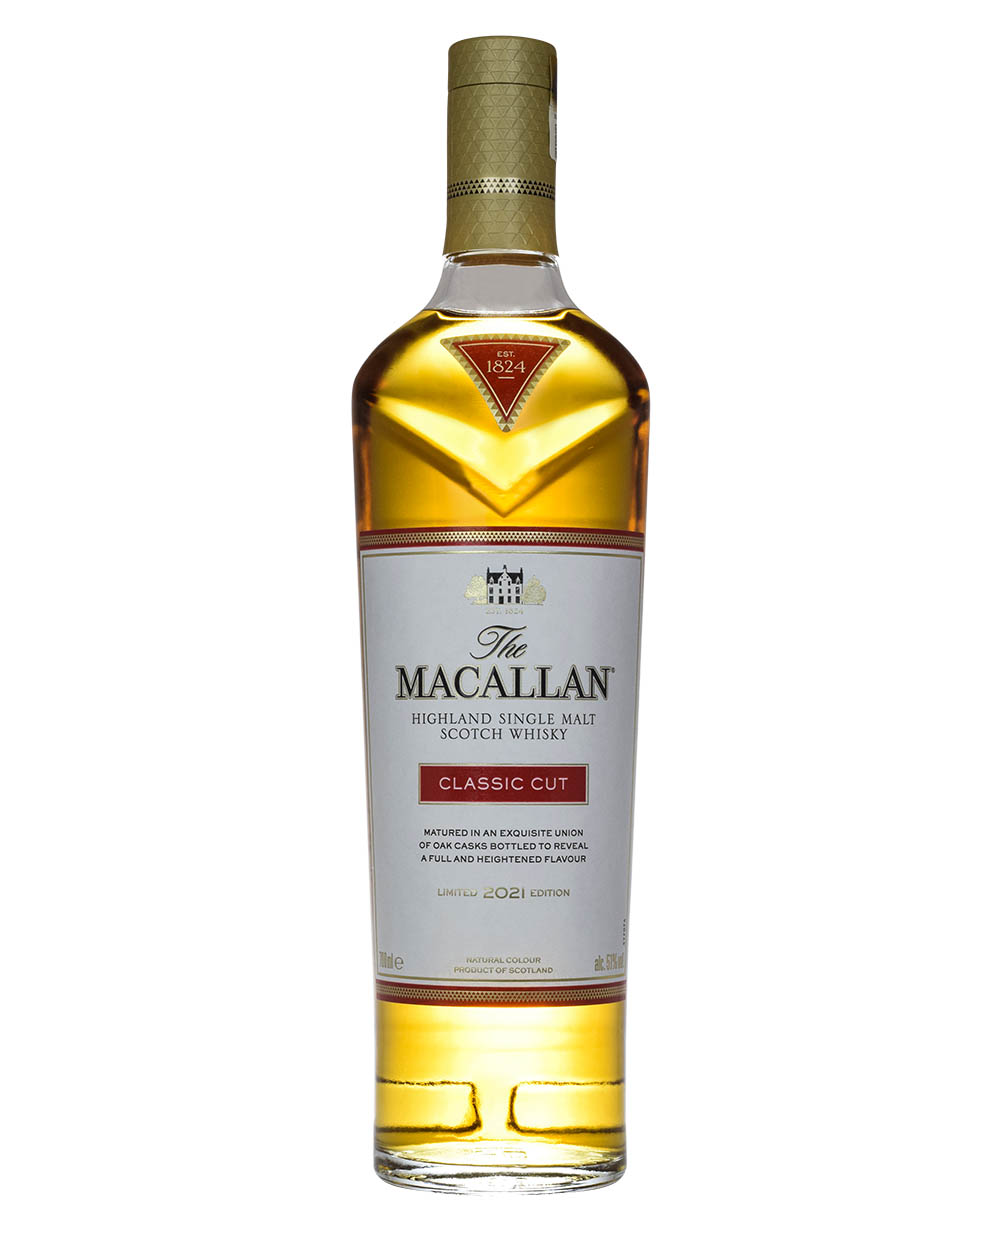 Macallan Classic Cut 2021 Musthave Malts MHM